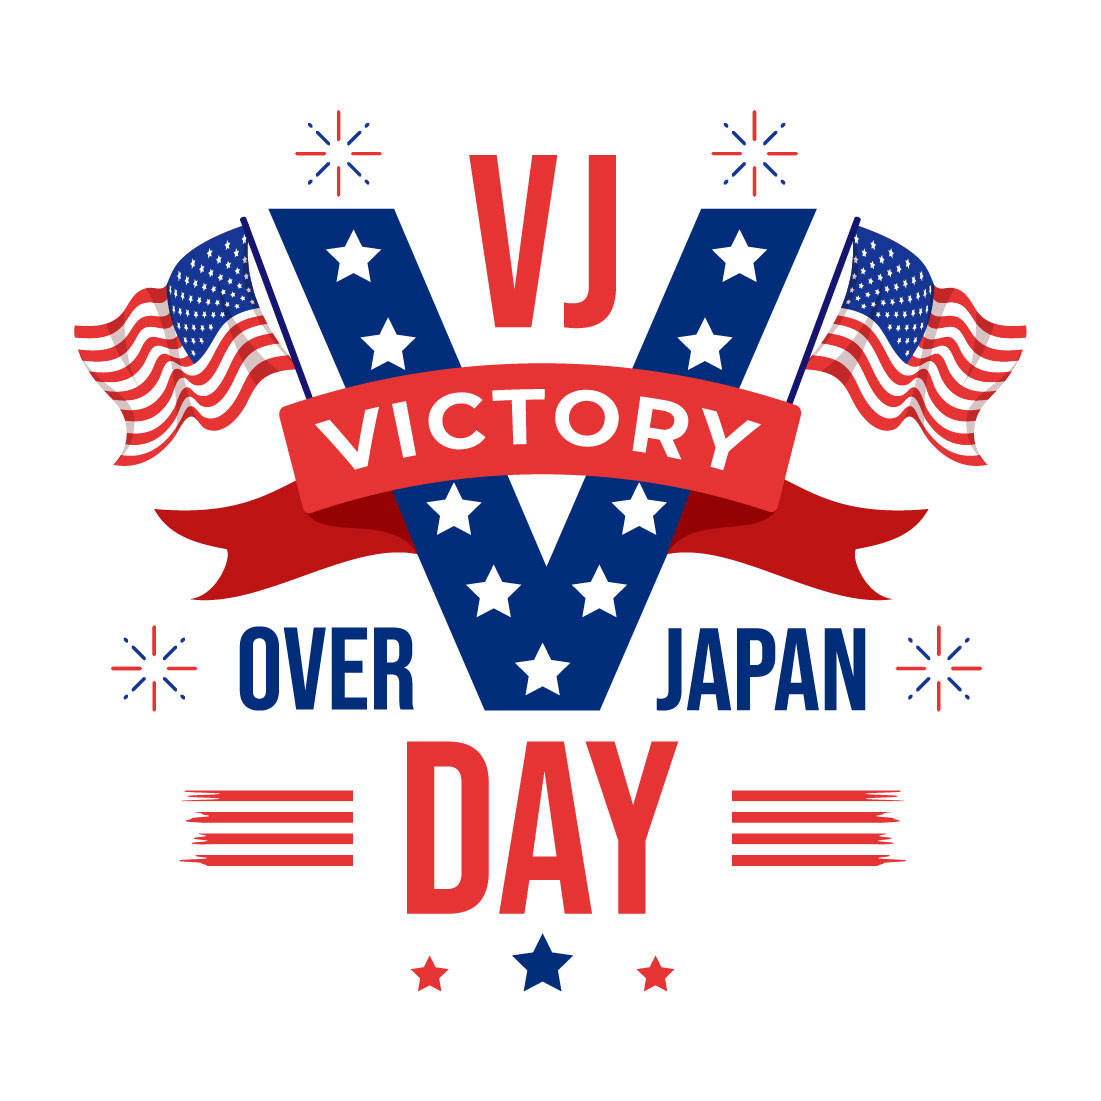 12 Victory Over Japan Day Illustration cover image.